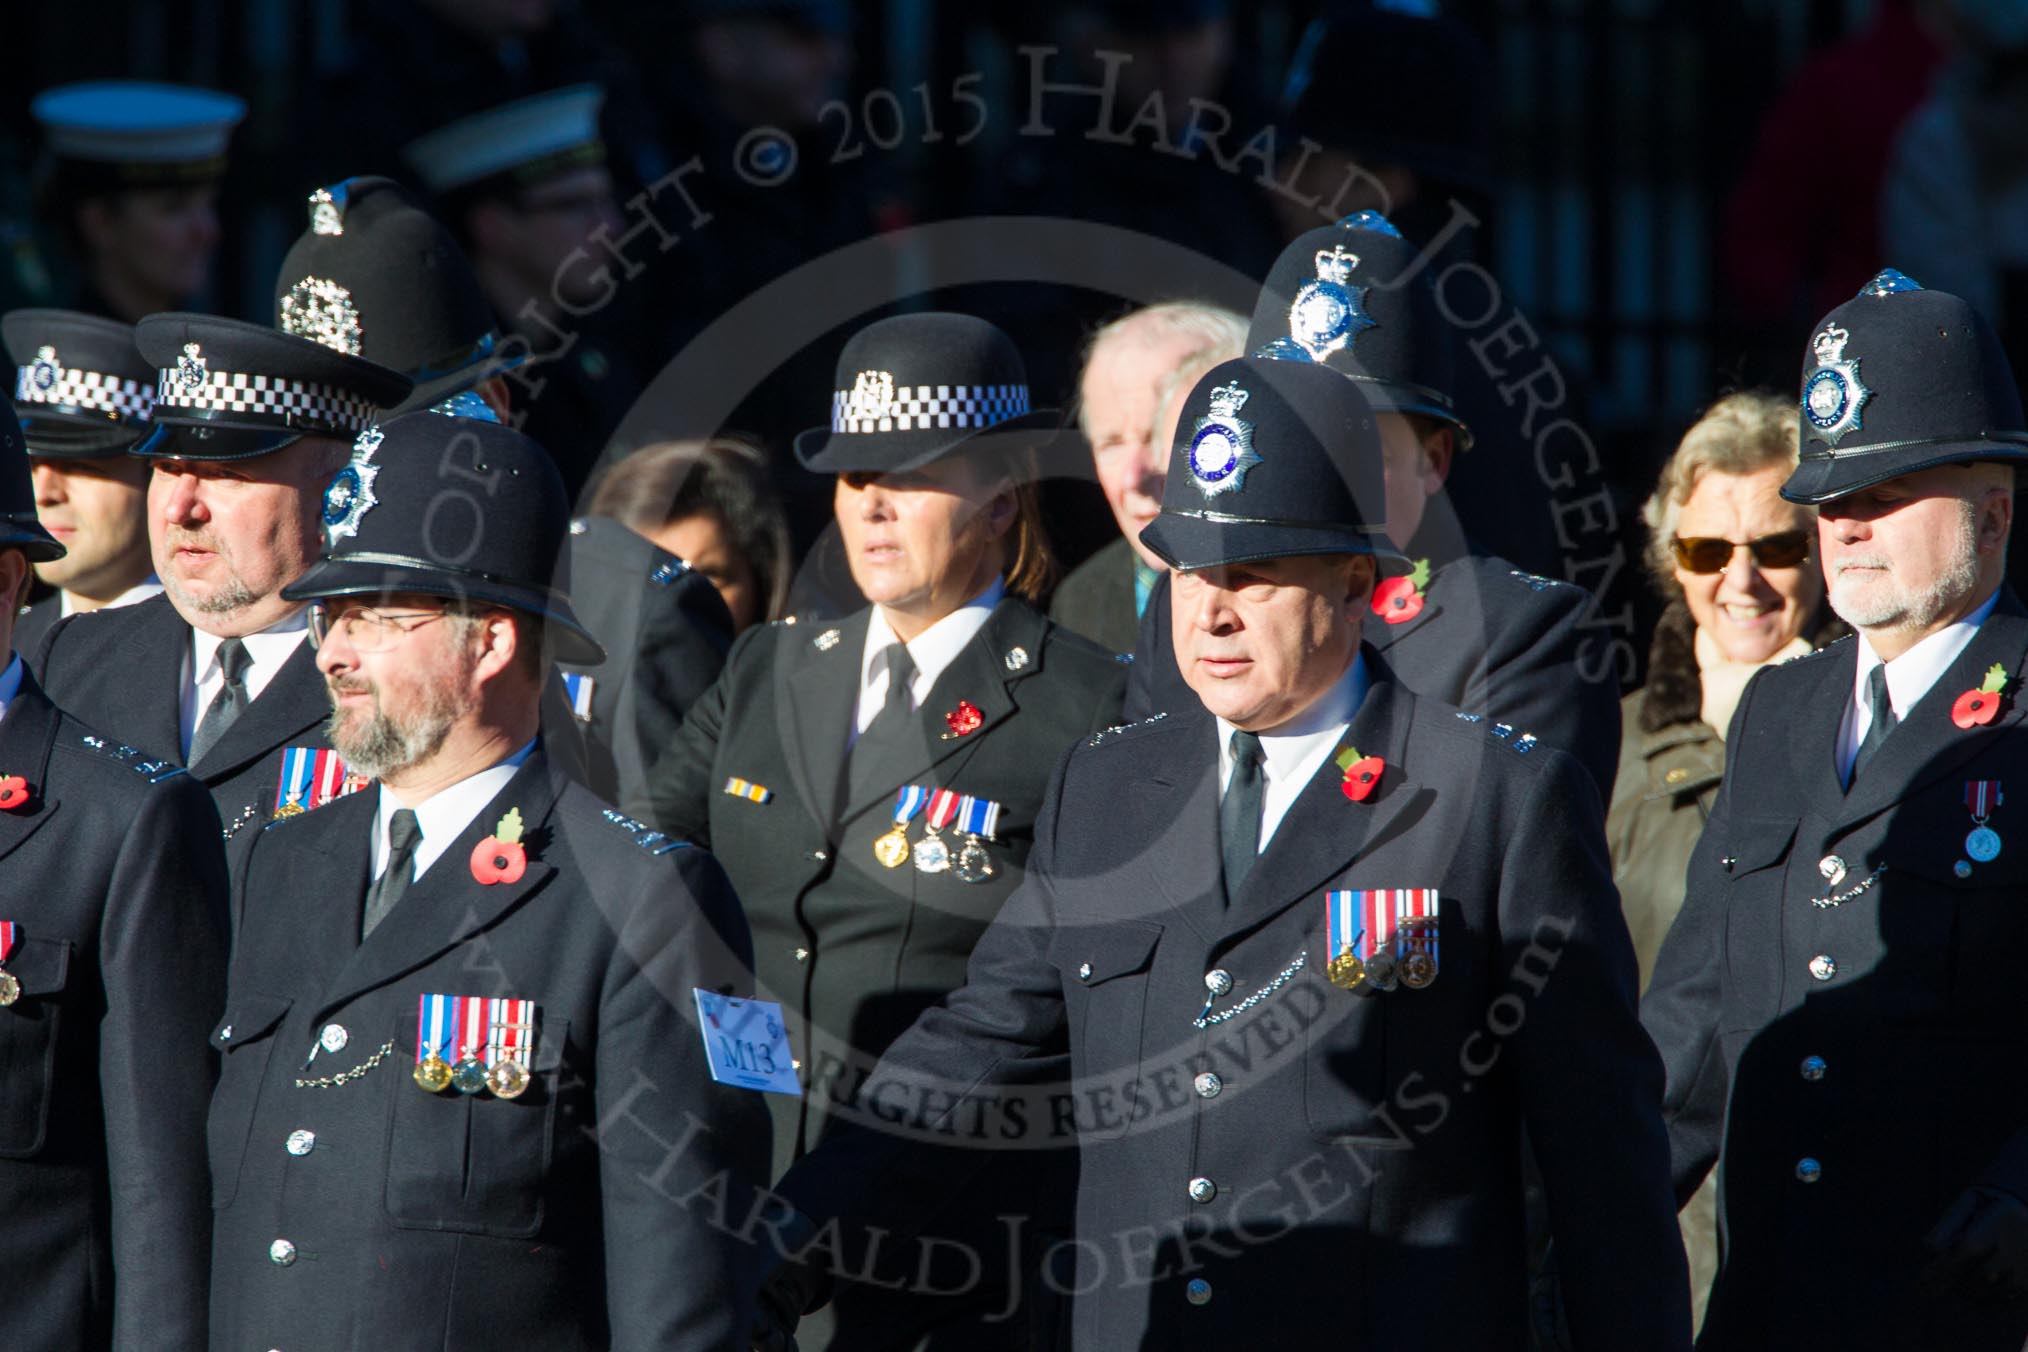 Remembrance Sunday Cenotaph March Past 2013: M13 - Metropolitan Special Constabulary. The Metropolitan Special Constabulary (MSC) is the part-time volunteer police service of the Metropolitan Police Service..
Press stand opposite the Foreign Office building, Whitehall, London SW1,
London,
Greater London,
United Kingdom,
on 10 November 2013 at 12:10, image #1964